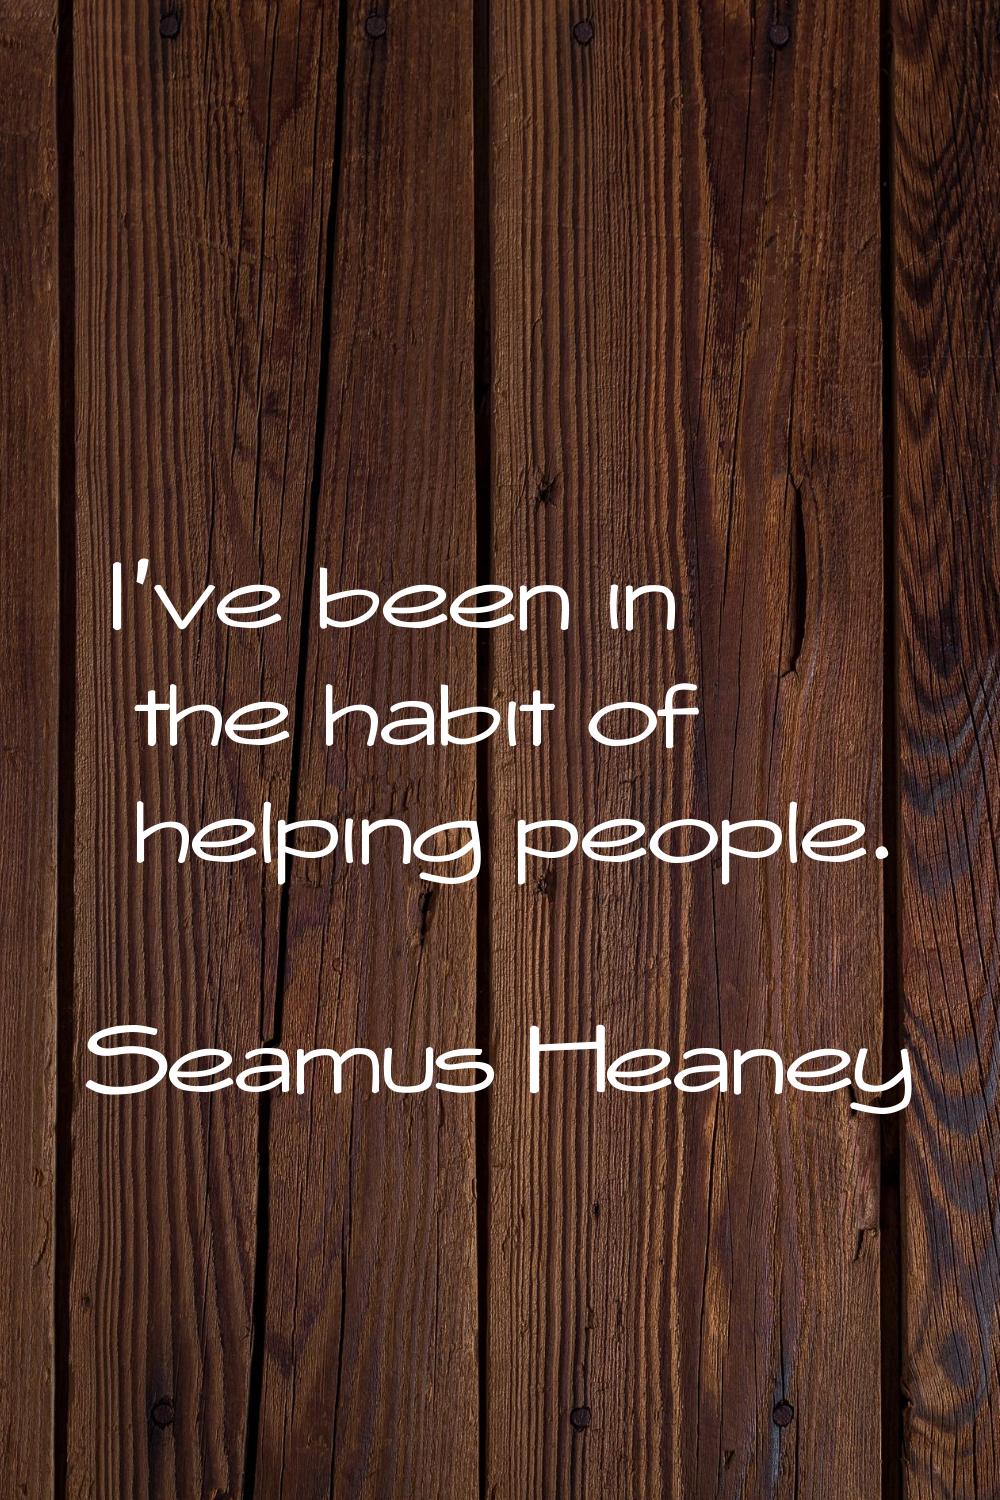 I've been in the habit of helping people.